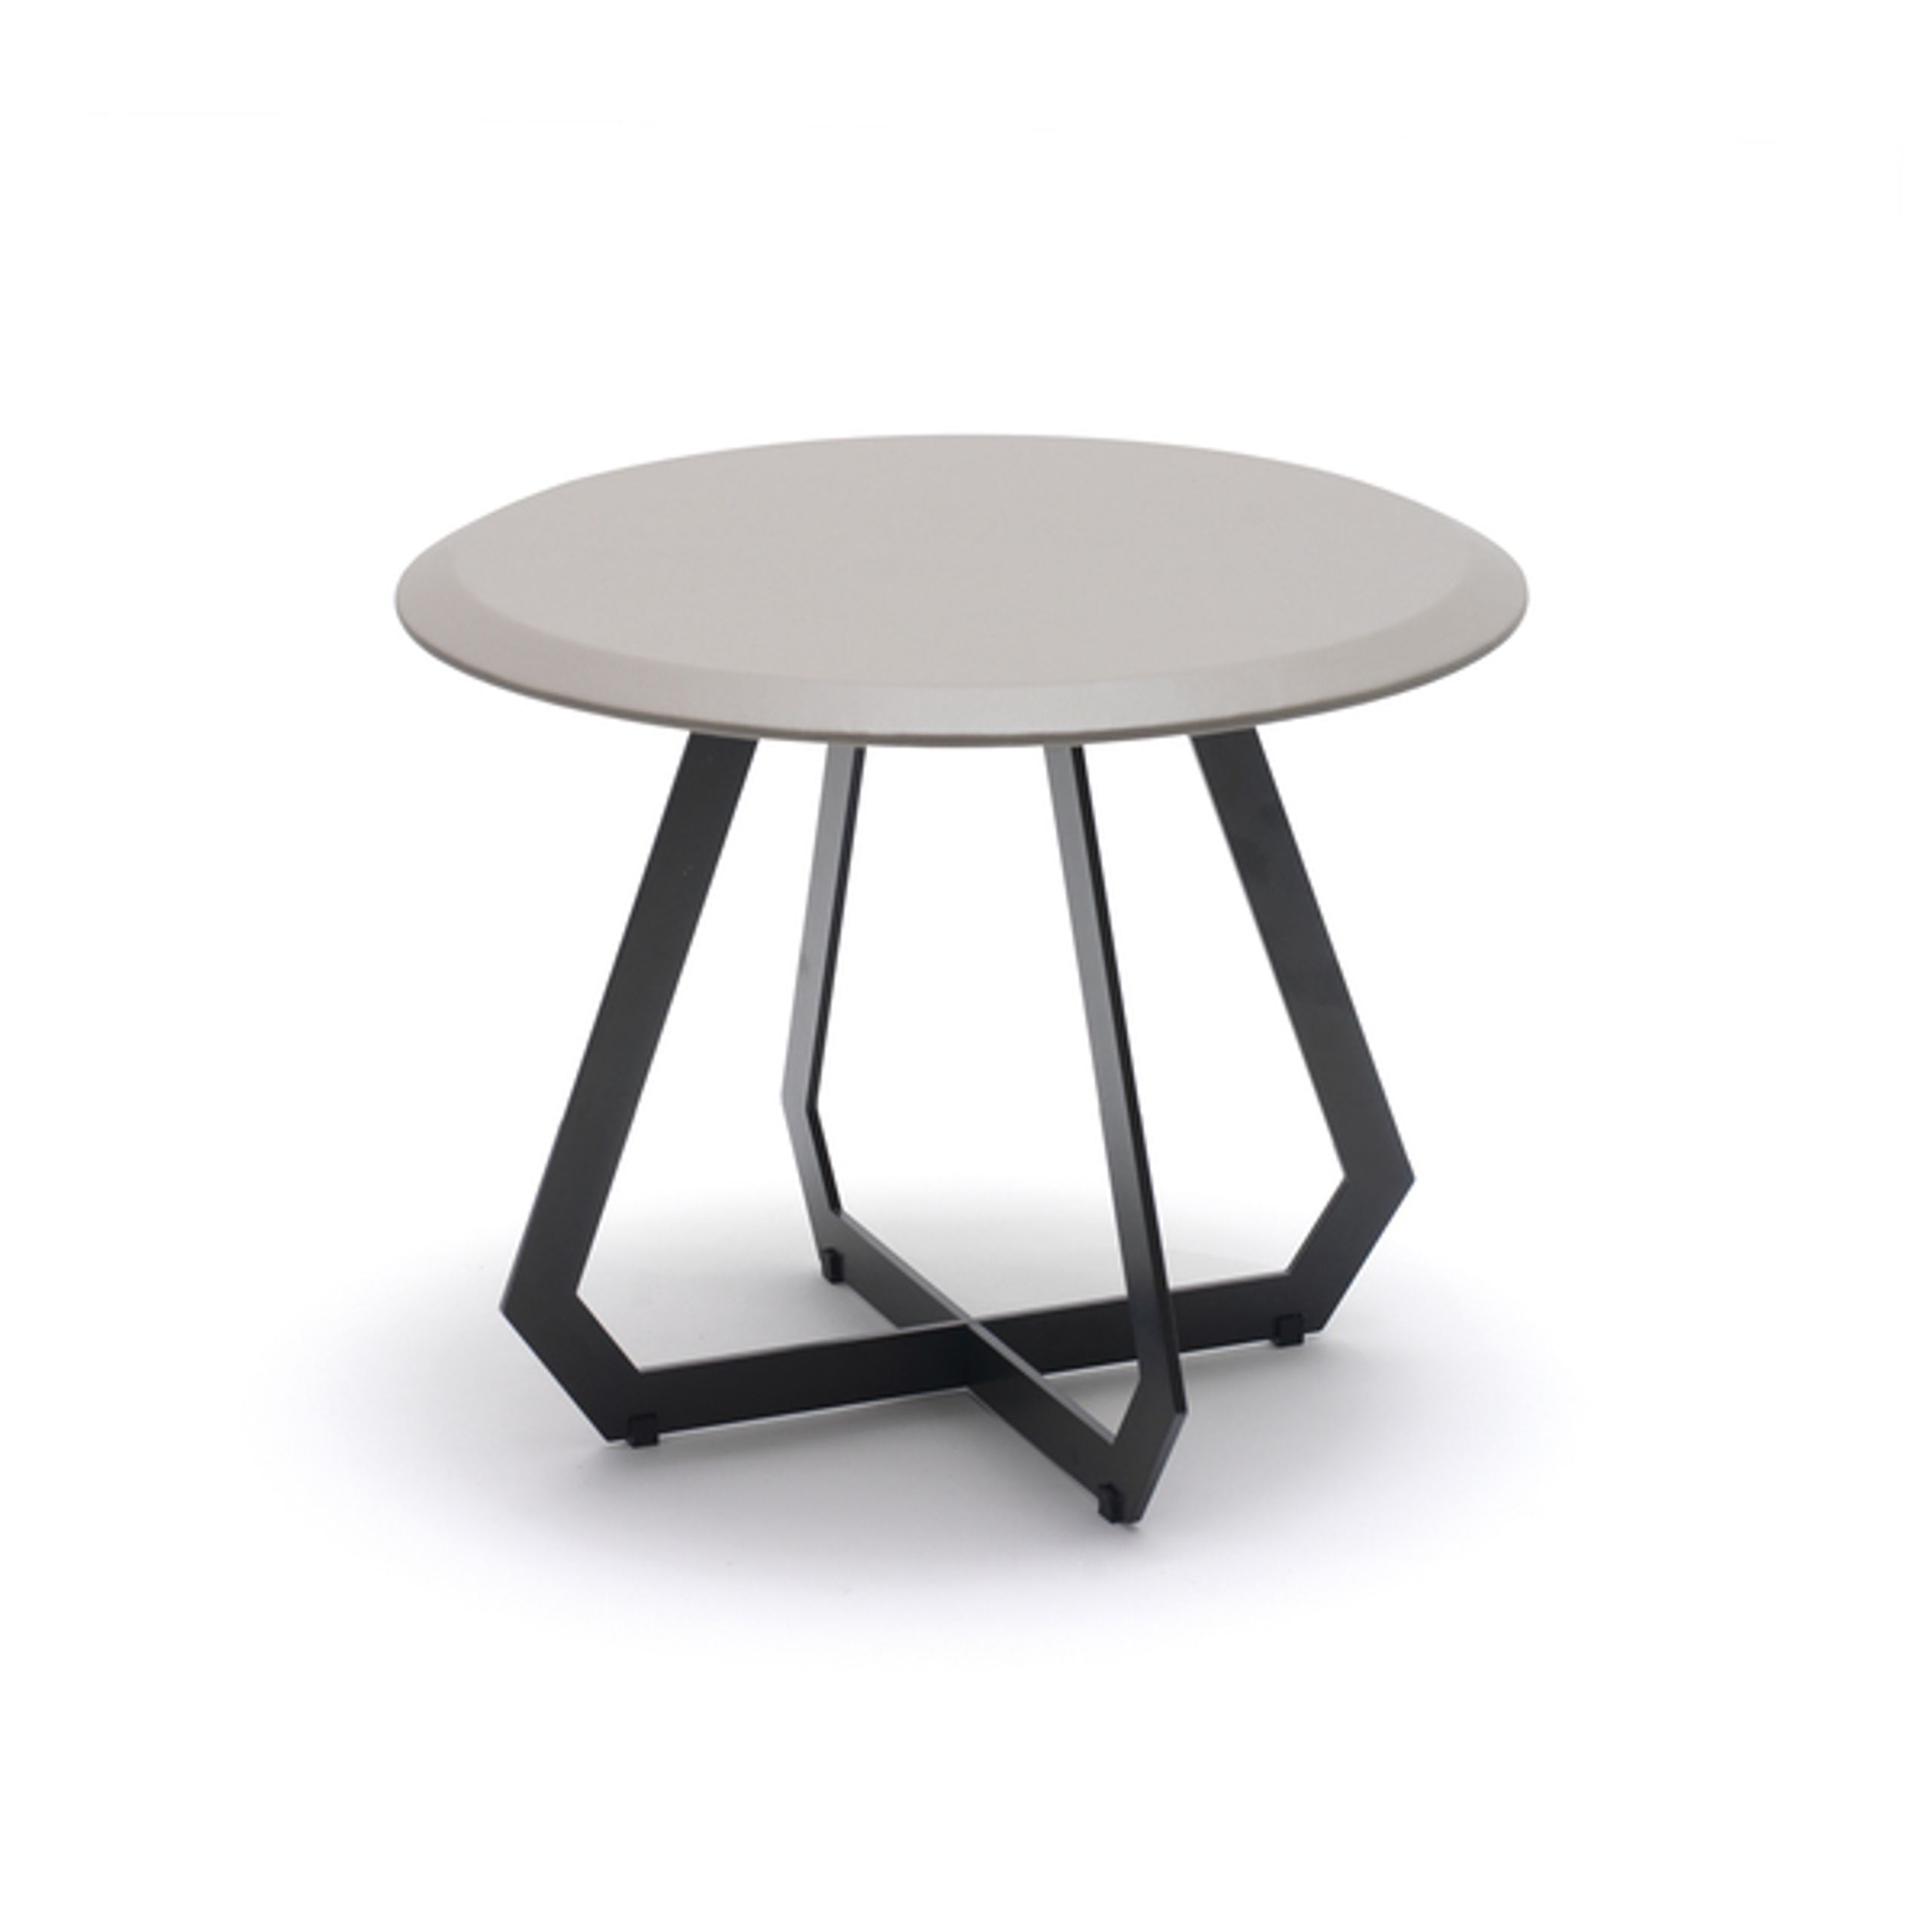 Design By Us - Couchtisch - Fetish Table  - Warm Grey Leather - Black